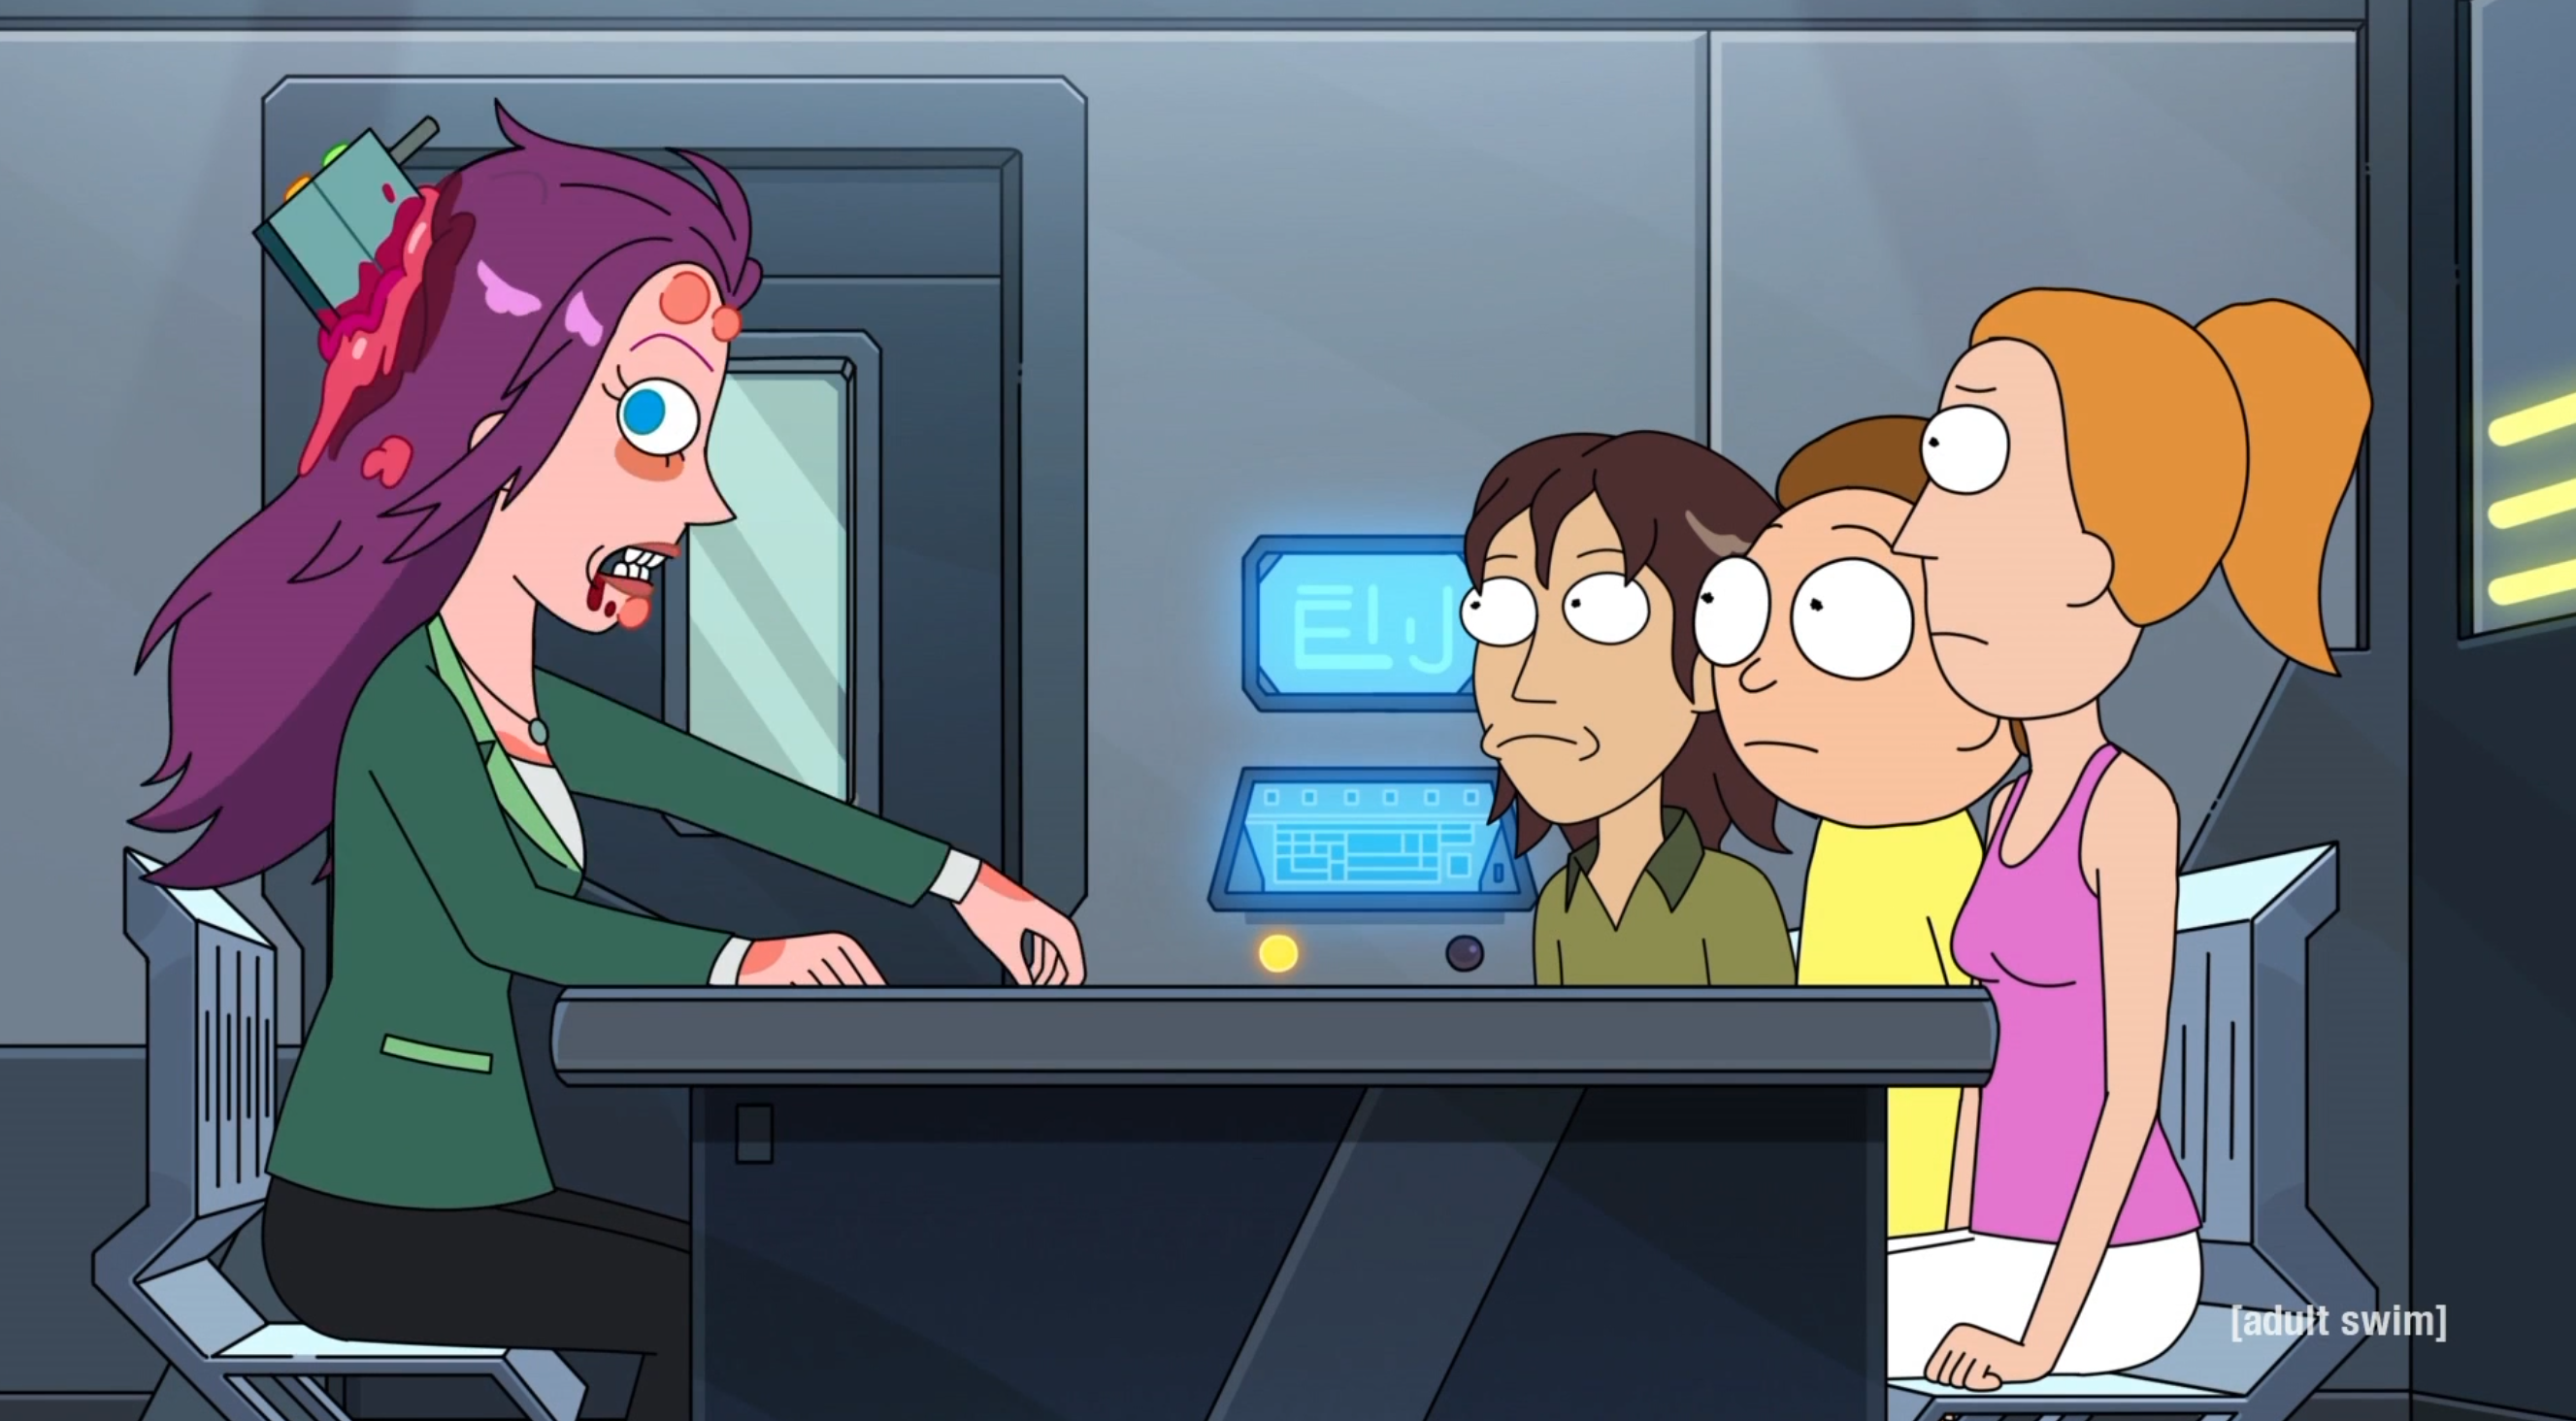 Rick and Morty
AI created an implant to fully control the human user 